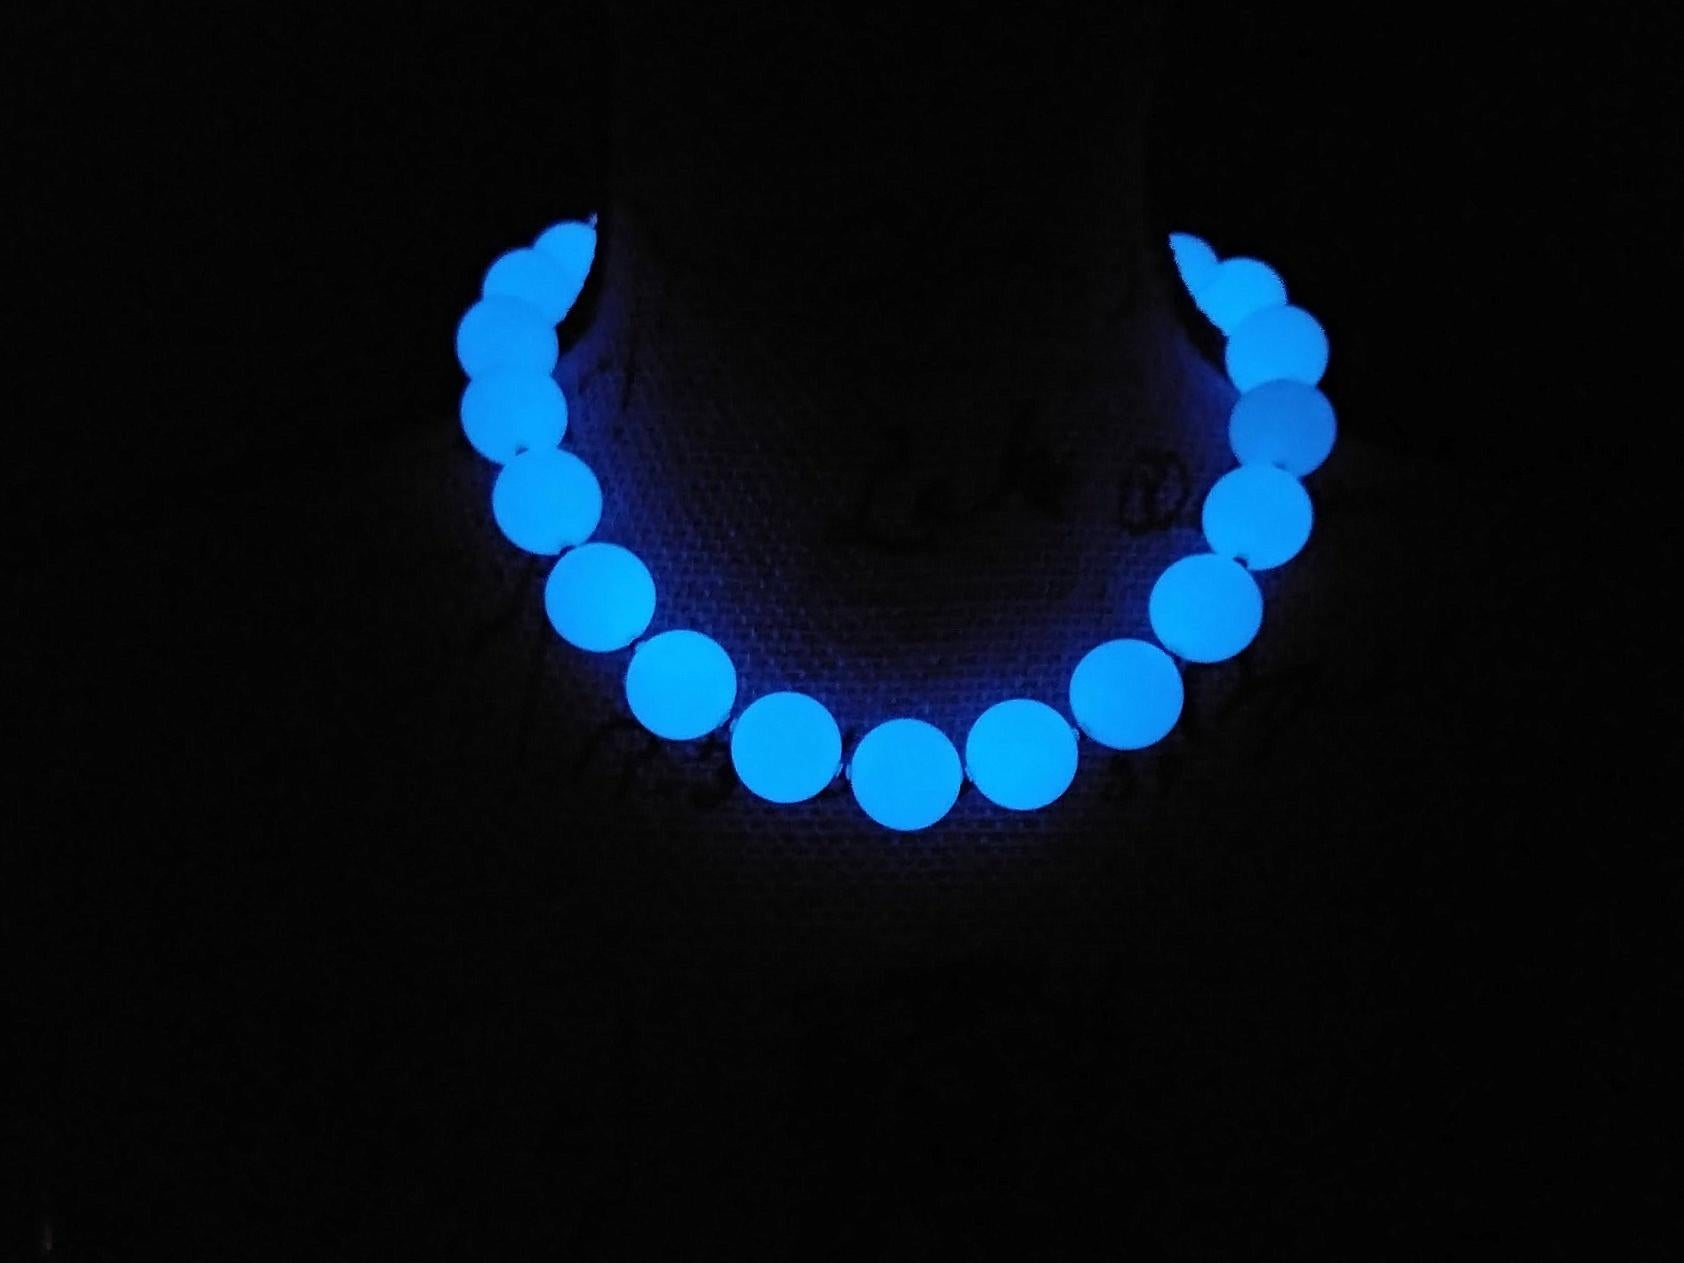 The length of the necklace is 18 inches (45 cm). The size of the smooth round beads is 16 mm. Beads are a very soft blue color.
Aragonite possesses natural phosphorescence, causing it to emit a captivating blue glow in the darkness.

Aragonite is a